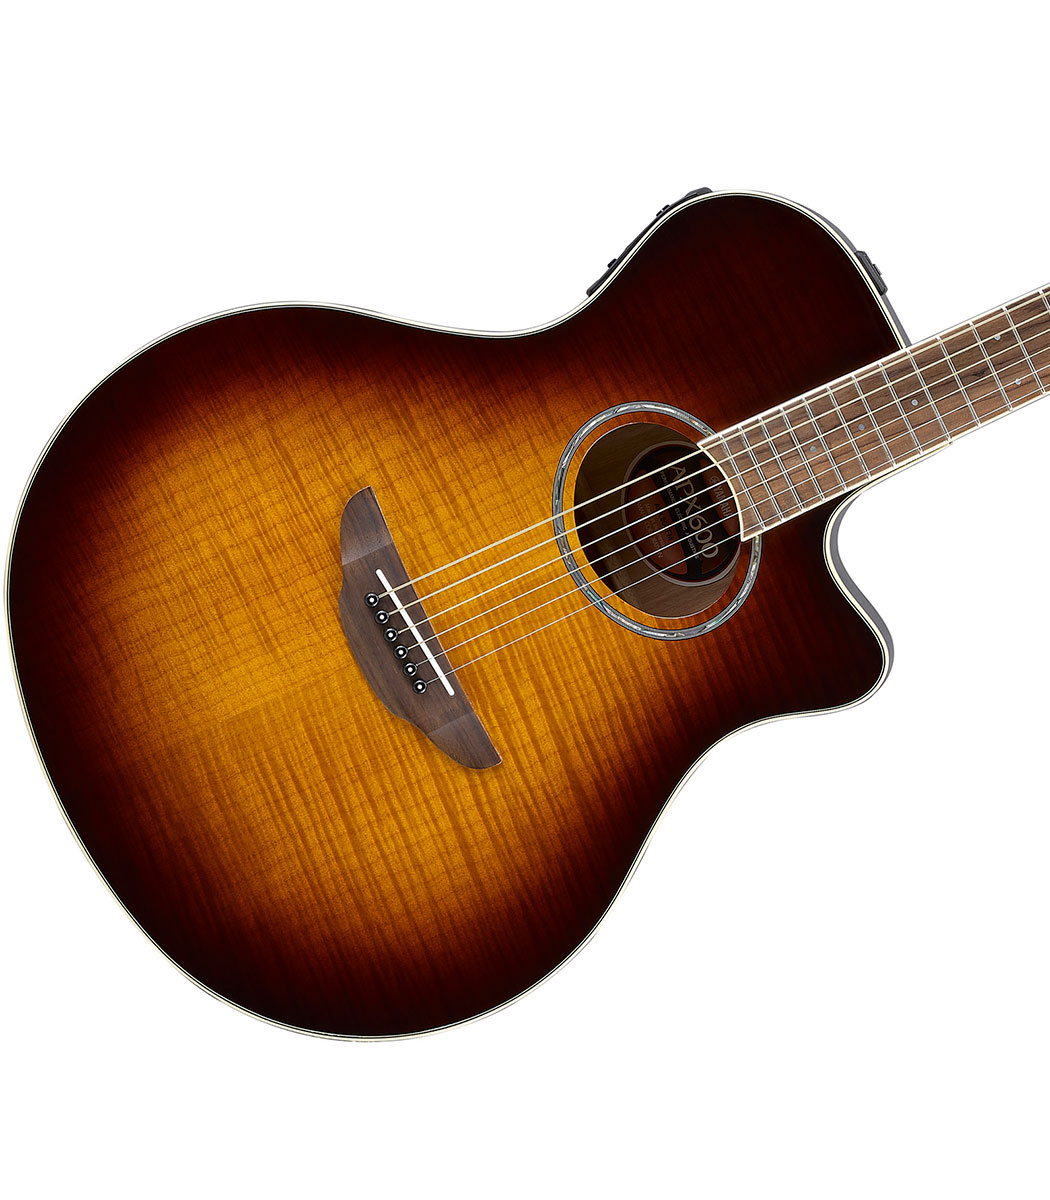 Reviewed: Yamaha APX 600 acoustic guitar